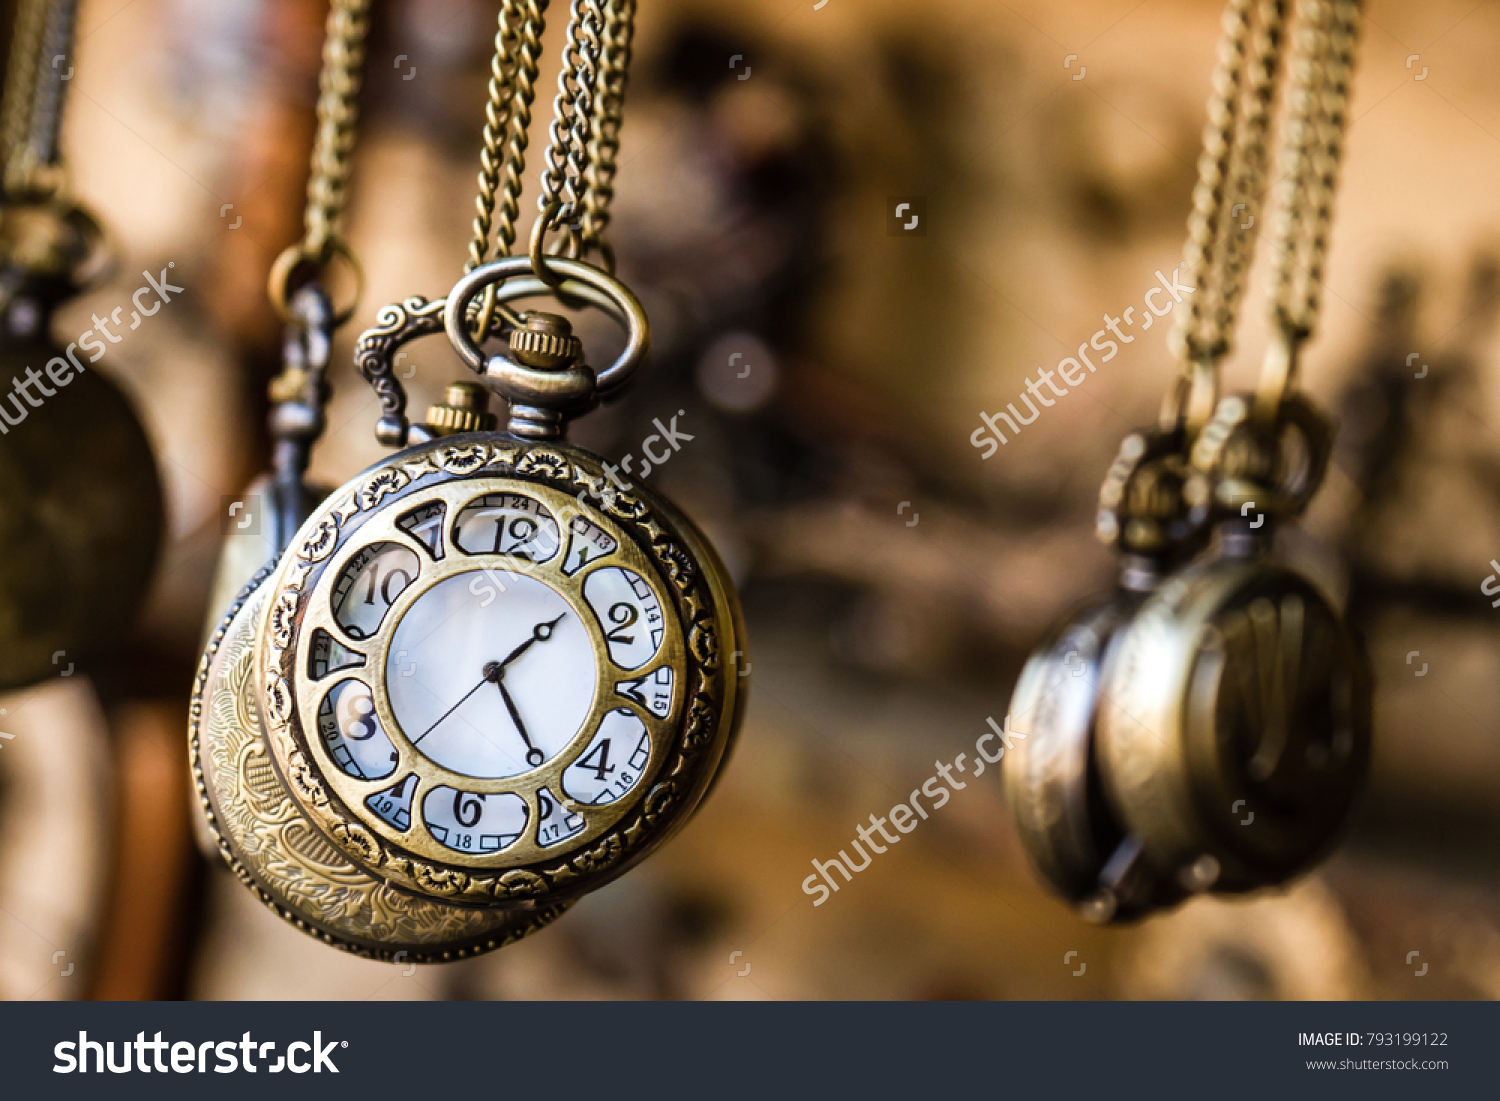 Vintage pocket watchs hanged with chains in an antique shop #793199122